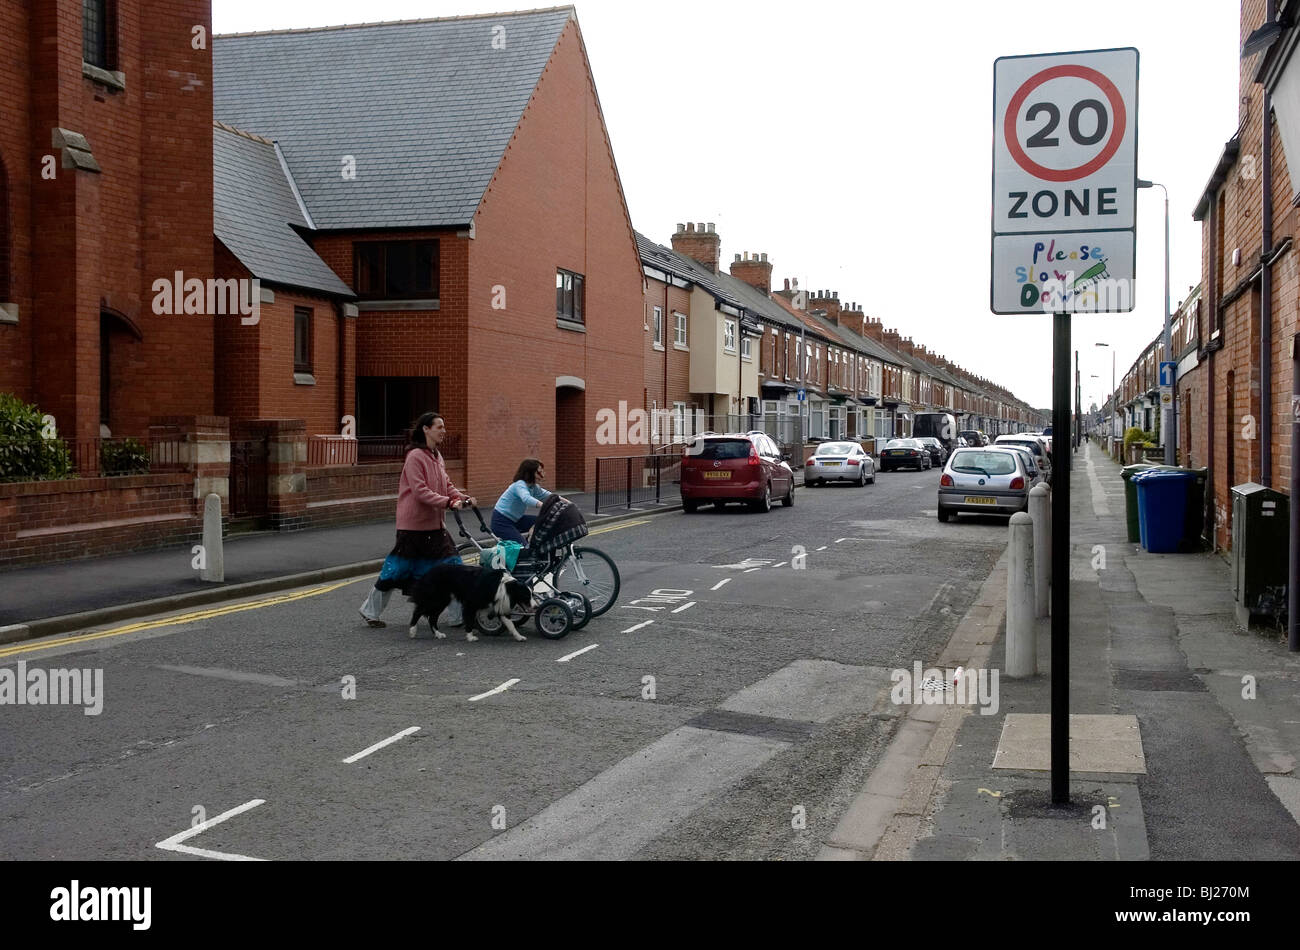 A woman pushes a pram across a street in Hull, UK, with a young girl on a bicycle. The street has a 20 mile per hour sign. Stock Photo